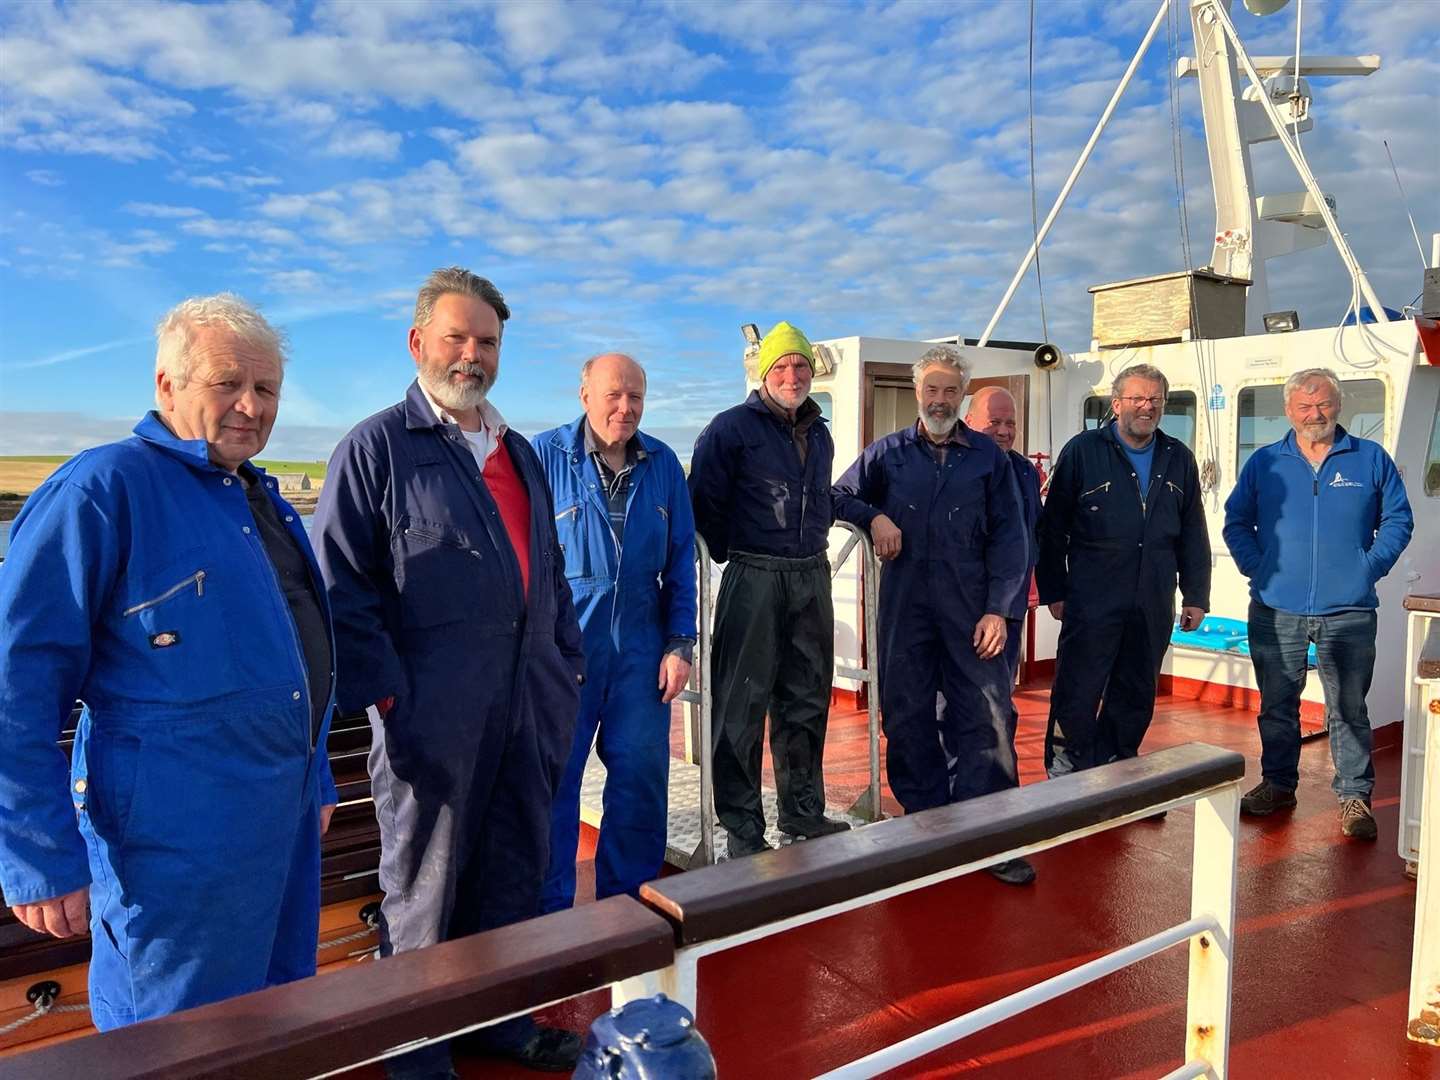 Some of the staff of John O'Groats Ferries at the old pier in Burwick on Thursday on the Pentland Venture's last sailing of the season. Picture: Fred Fermor